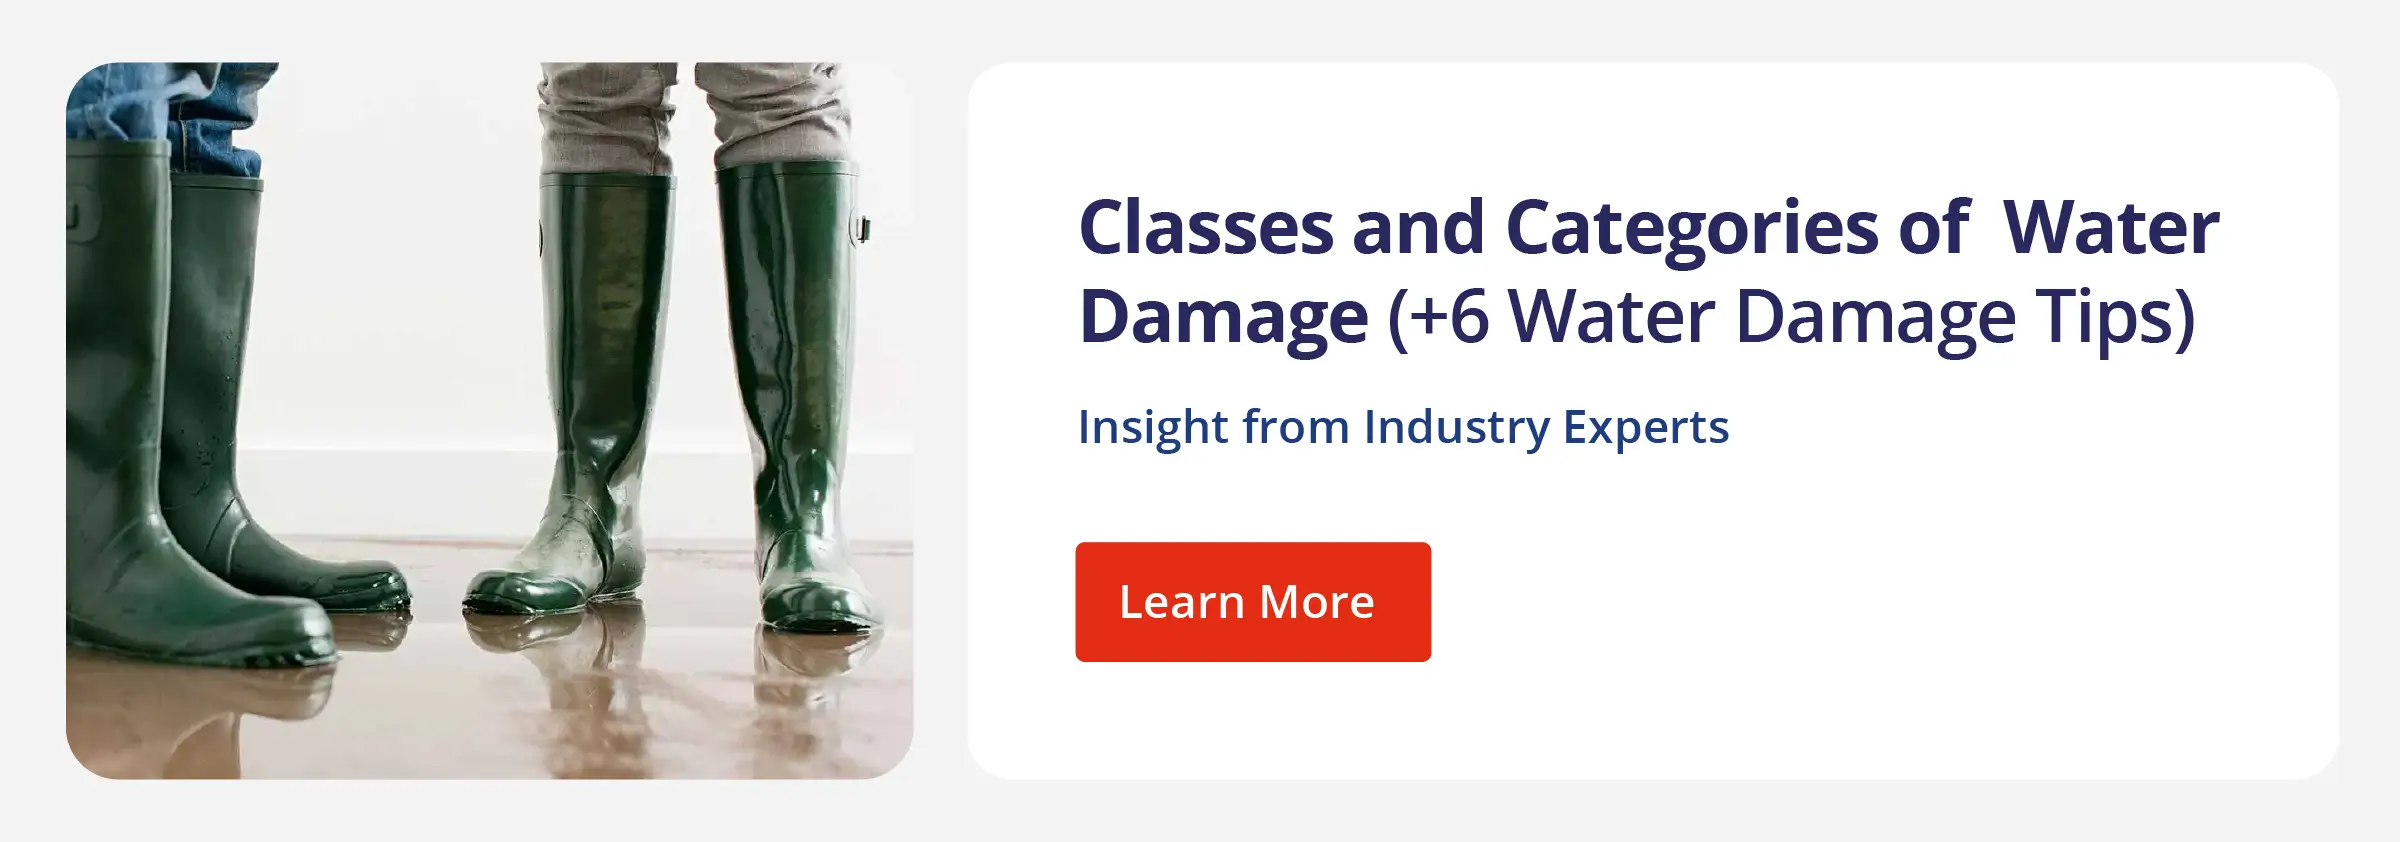 Clickable graphic directing to Rainbow Restoration's blog Classes and Categories of Water Damage (+6 Water Damage Tips).